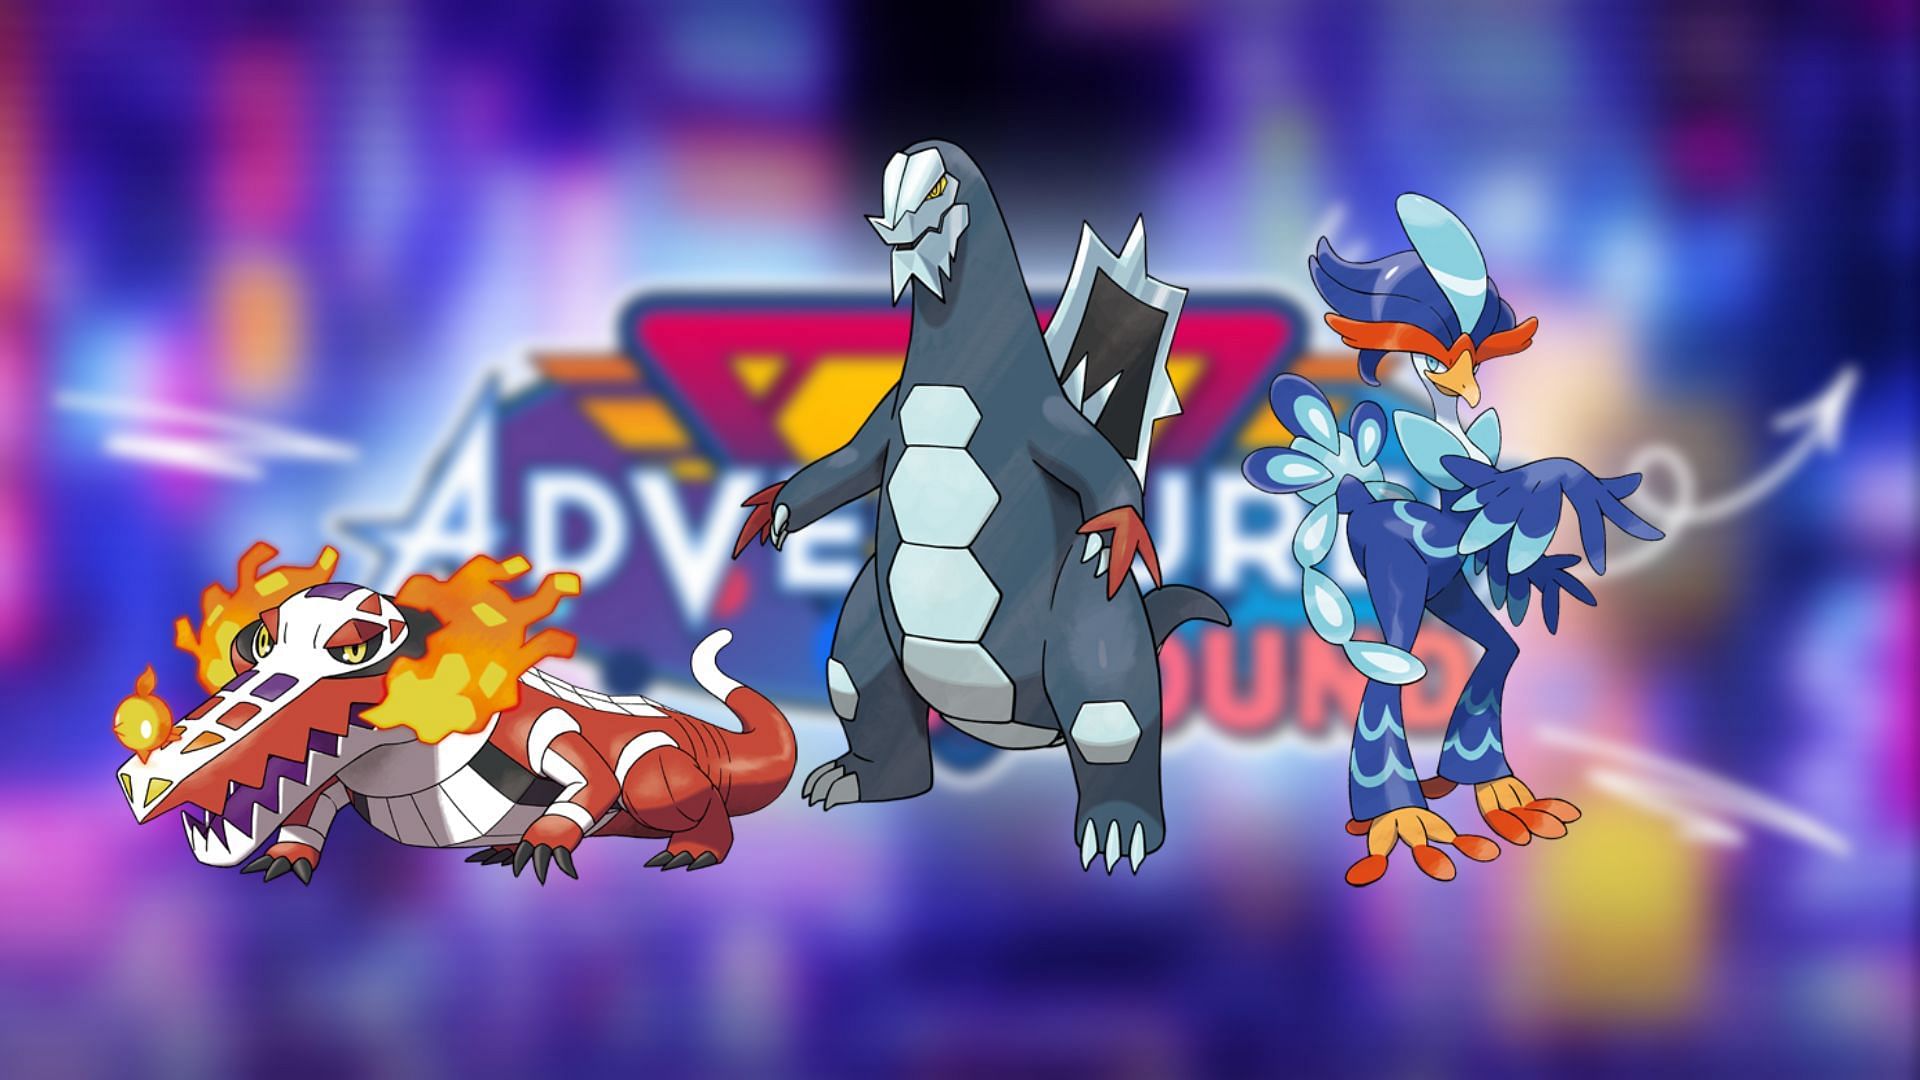 Current DLC mons that are coming back. Do note that this is based